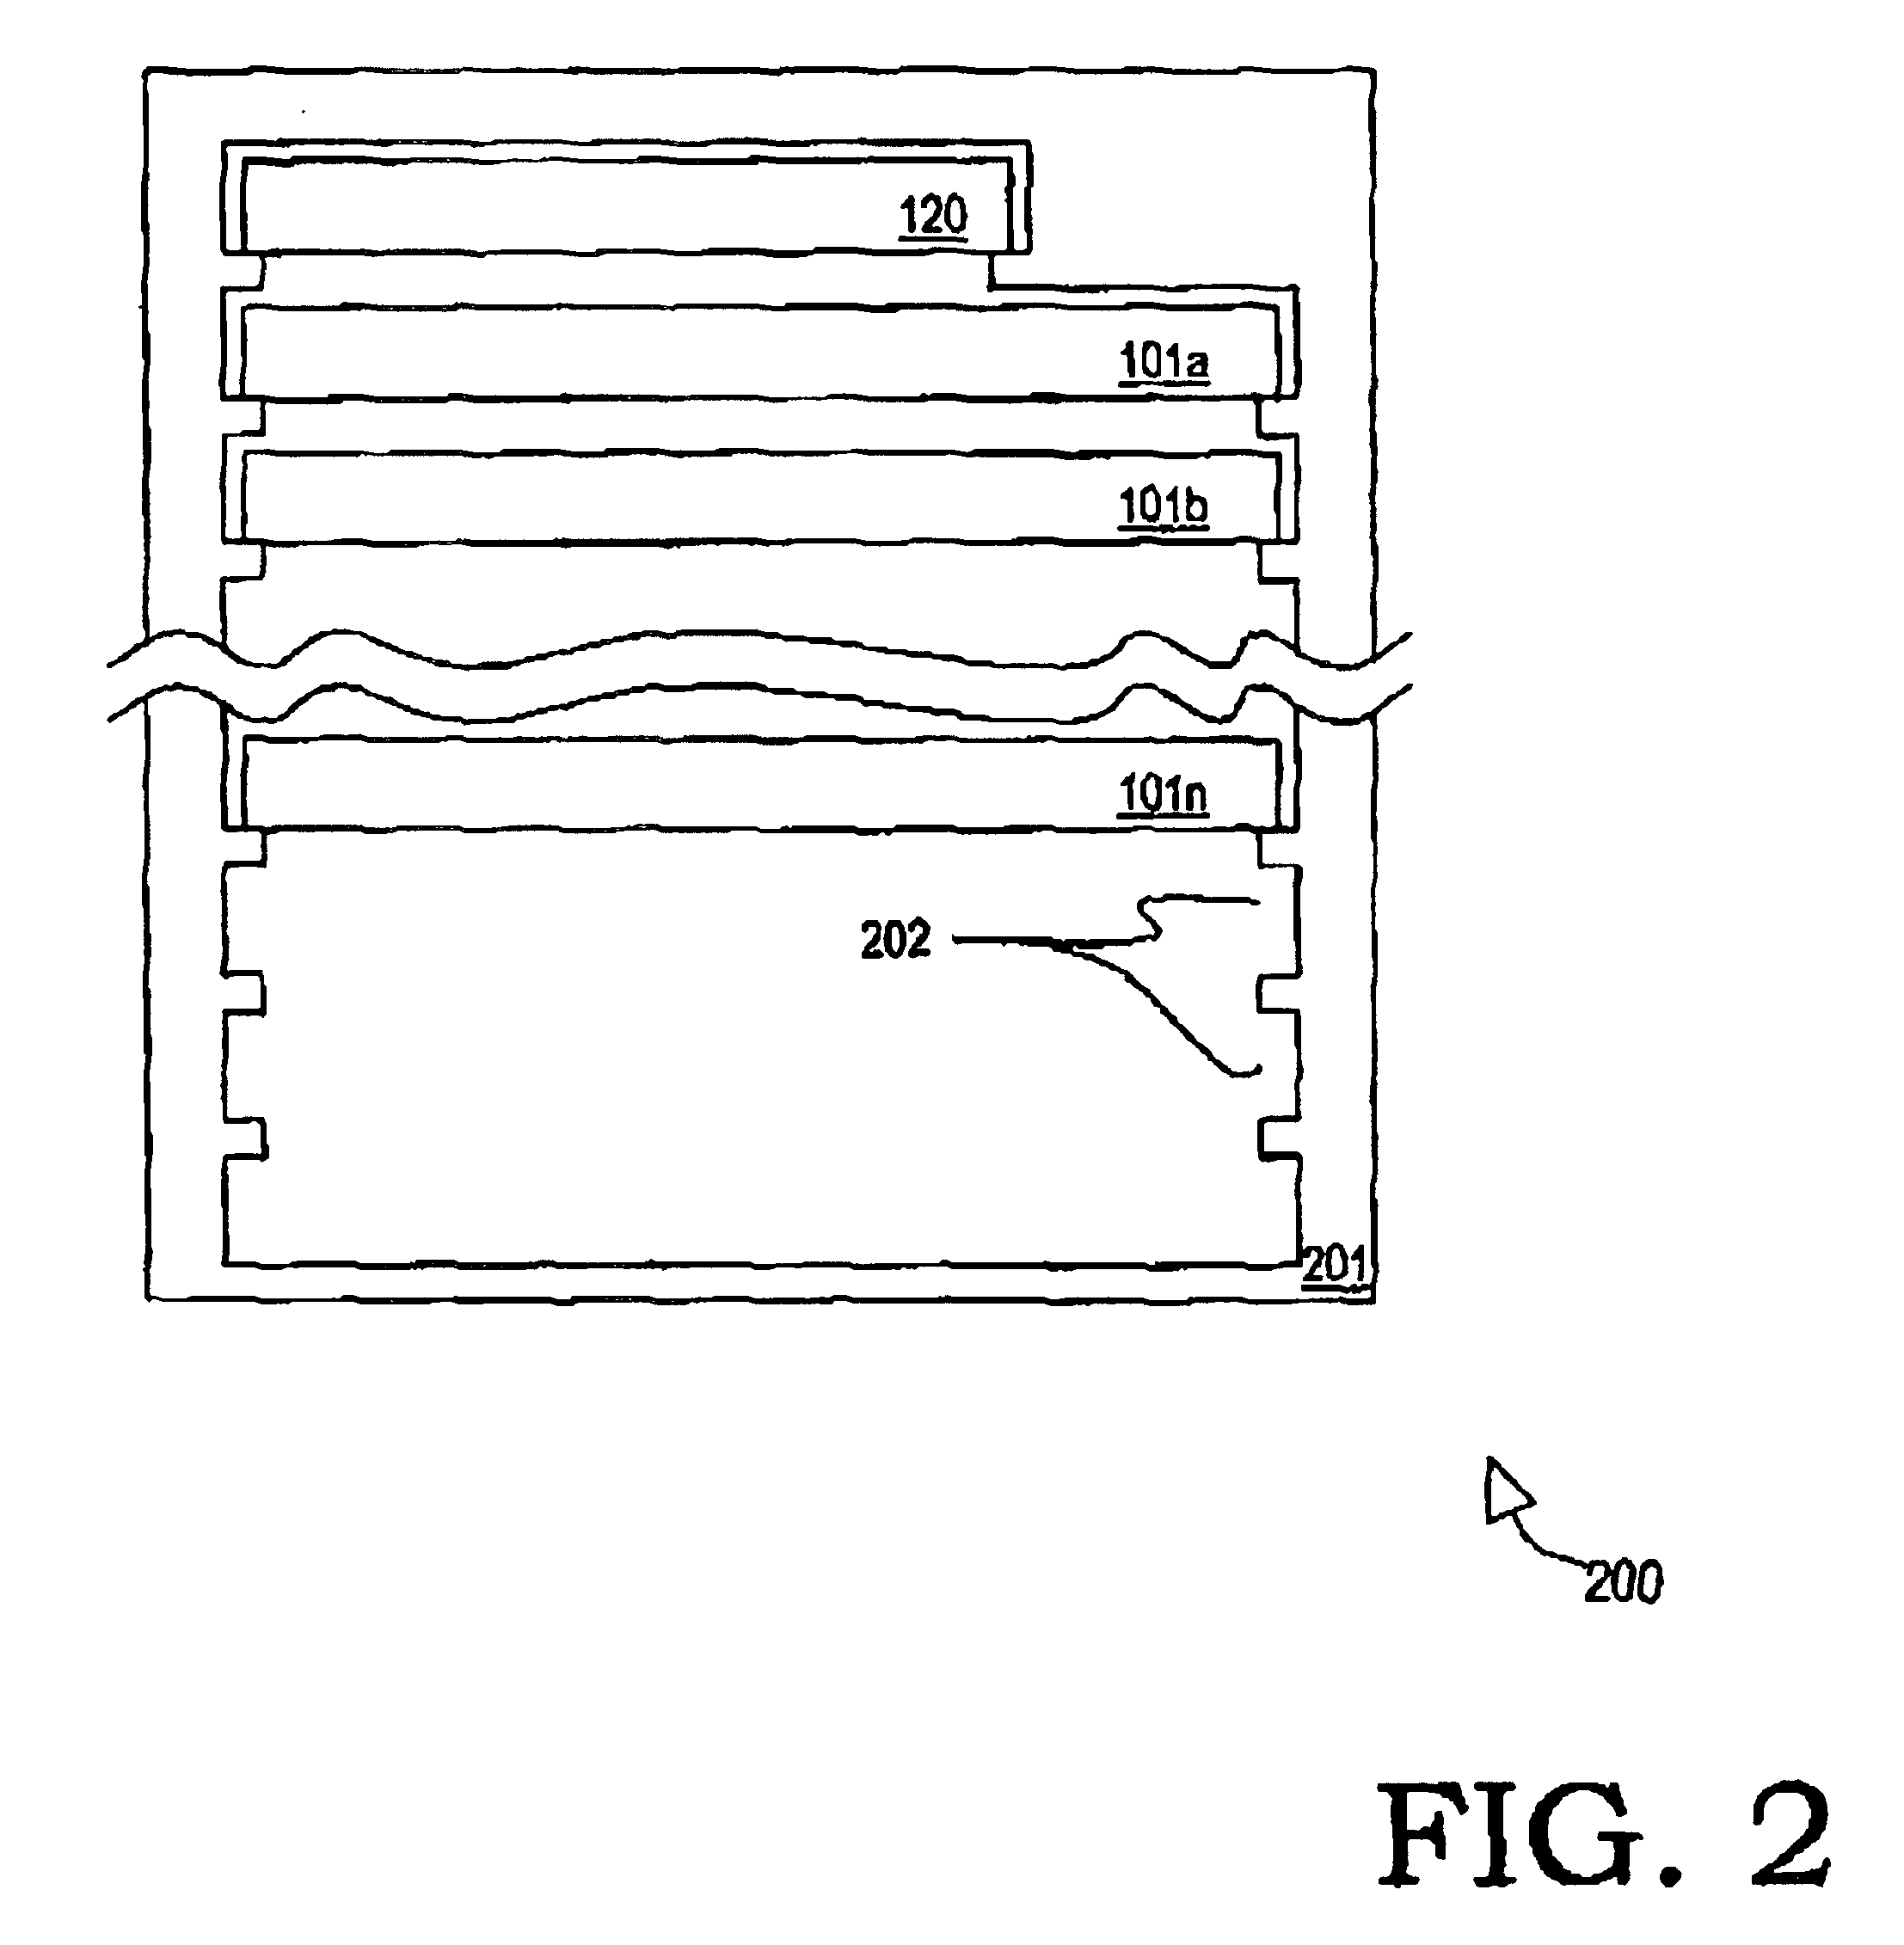 Logging insertion/removal of server blades in a data processing system